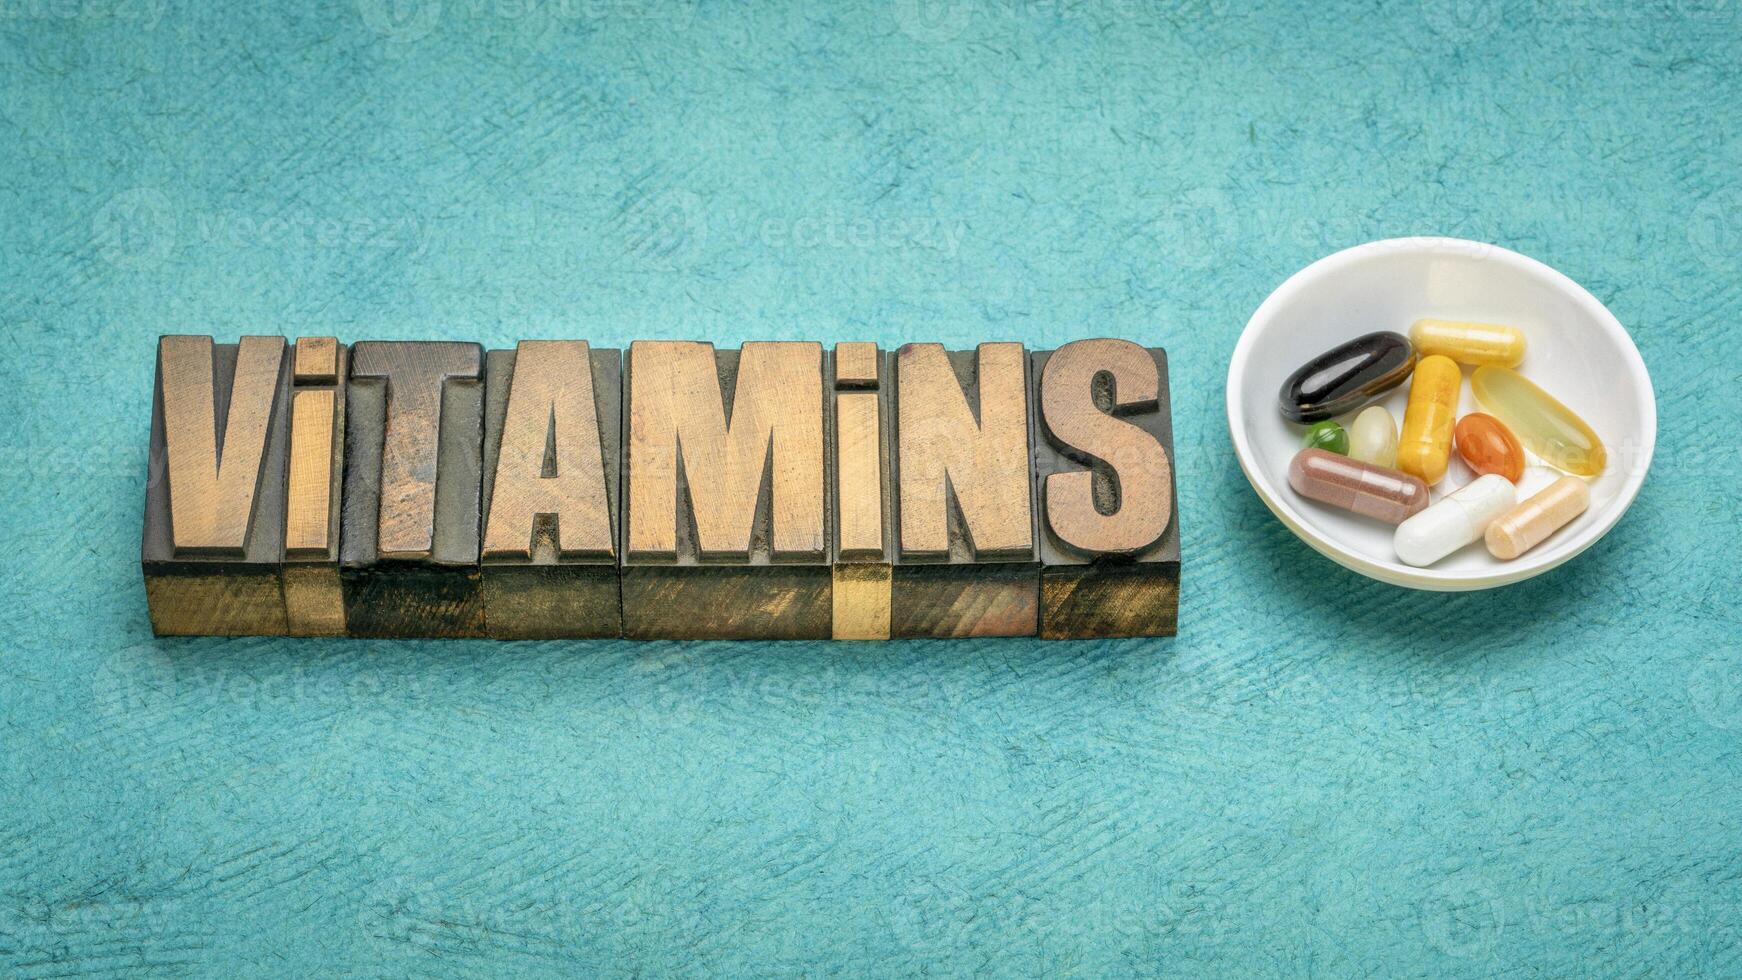 vitamins word in vintage letterpress wood type with a small bowl of pills and capsules, healthy lifestyle concept photo